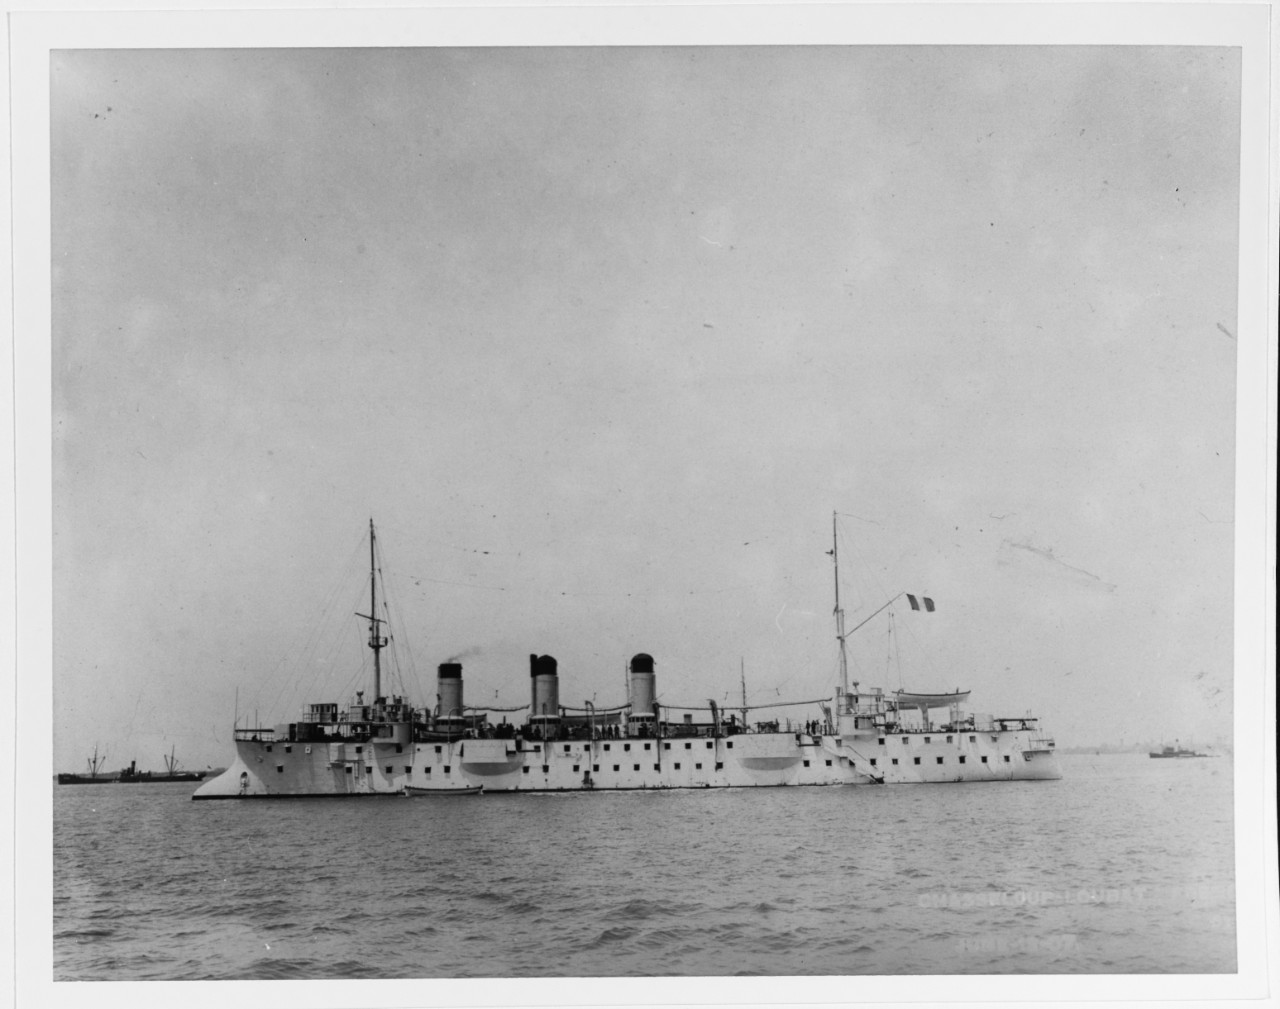 CHASSELOUP-LAUBAT (French Protected Cruiser)